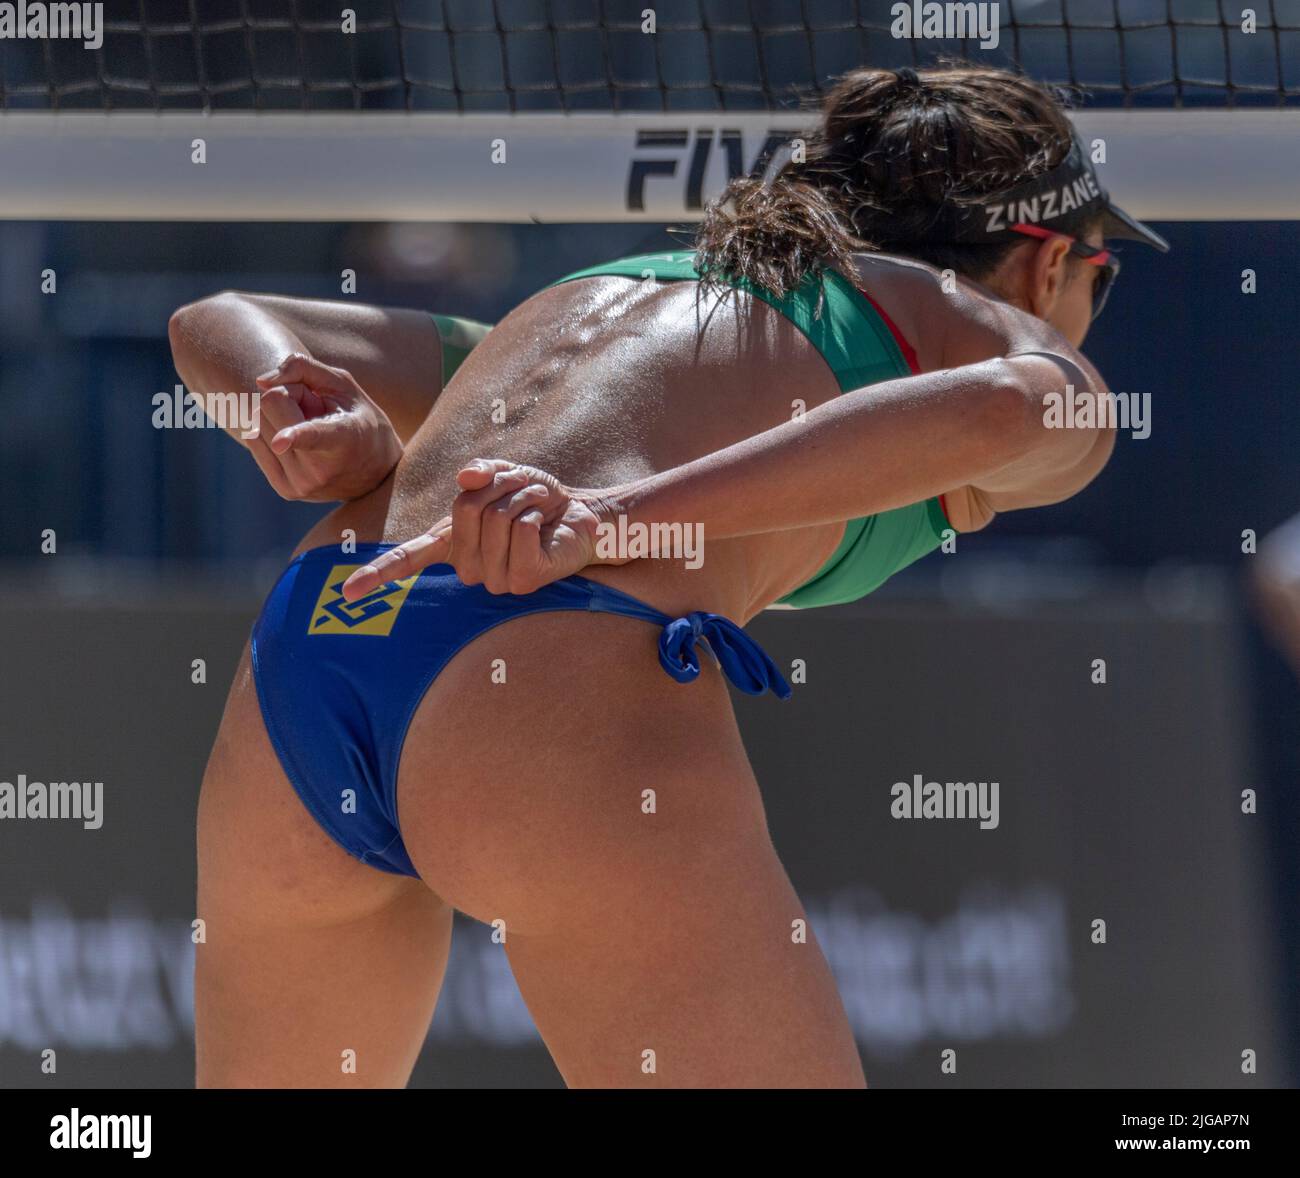 Gstaad Switzerland, 9th July 2022: Barbara of Brazil Team is in action  during Swatch Beach Pro Gstaad 2022 Credit: Eric Dubost/Alamy Live News  Stock Photo - Alamy